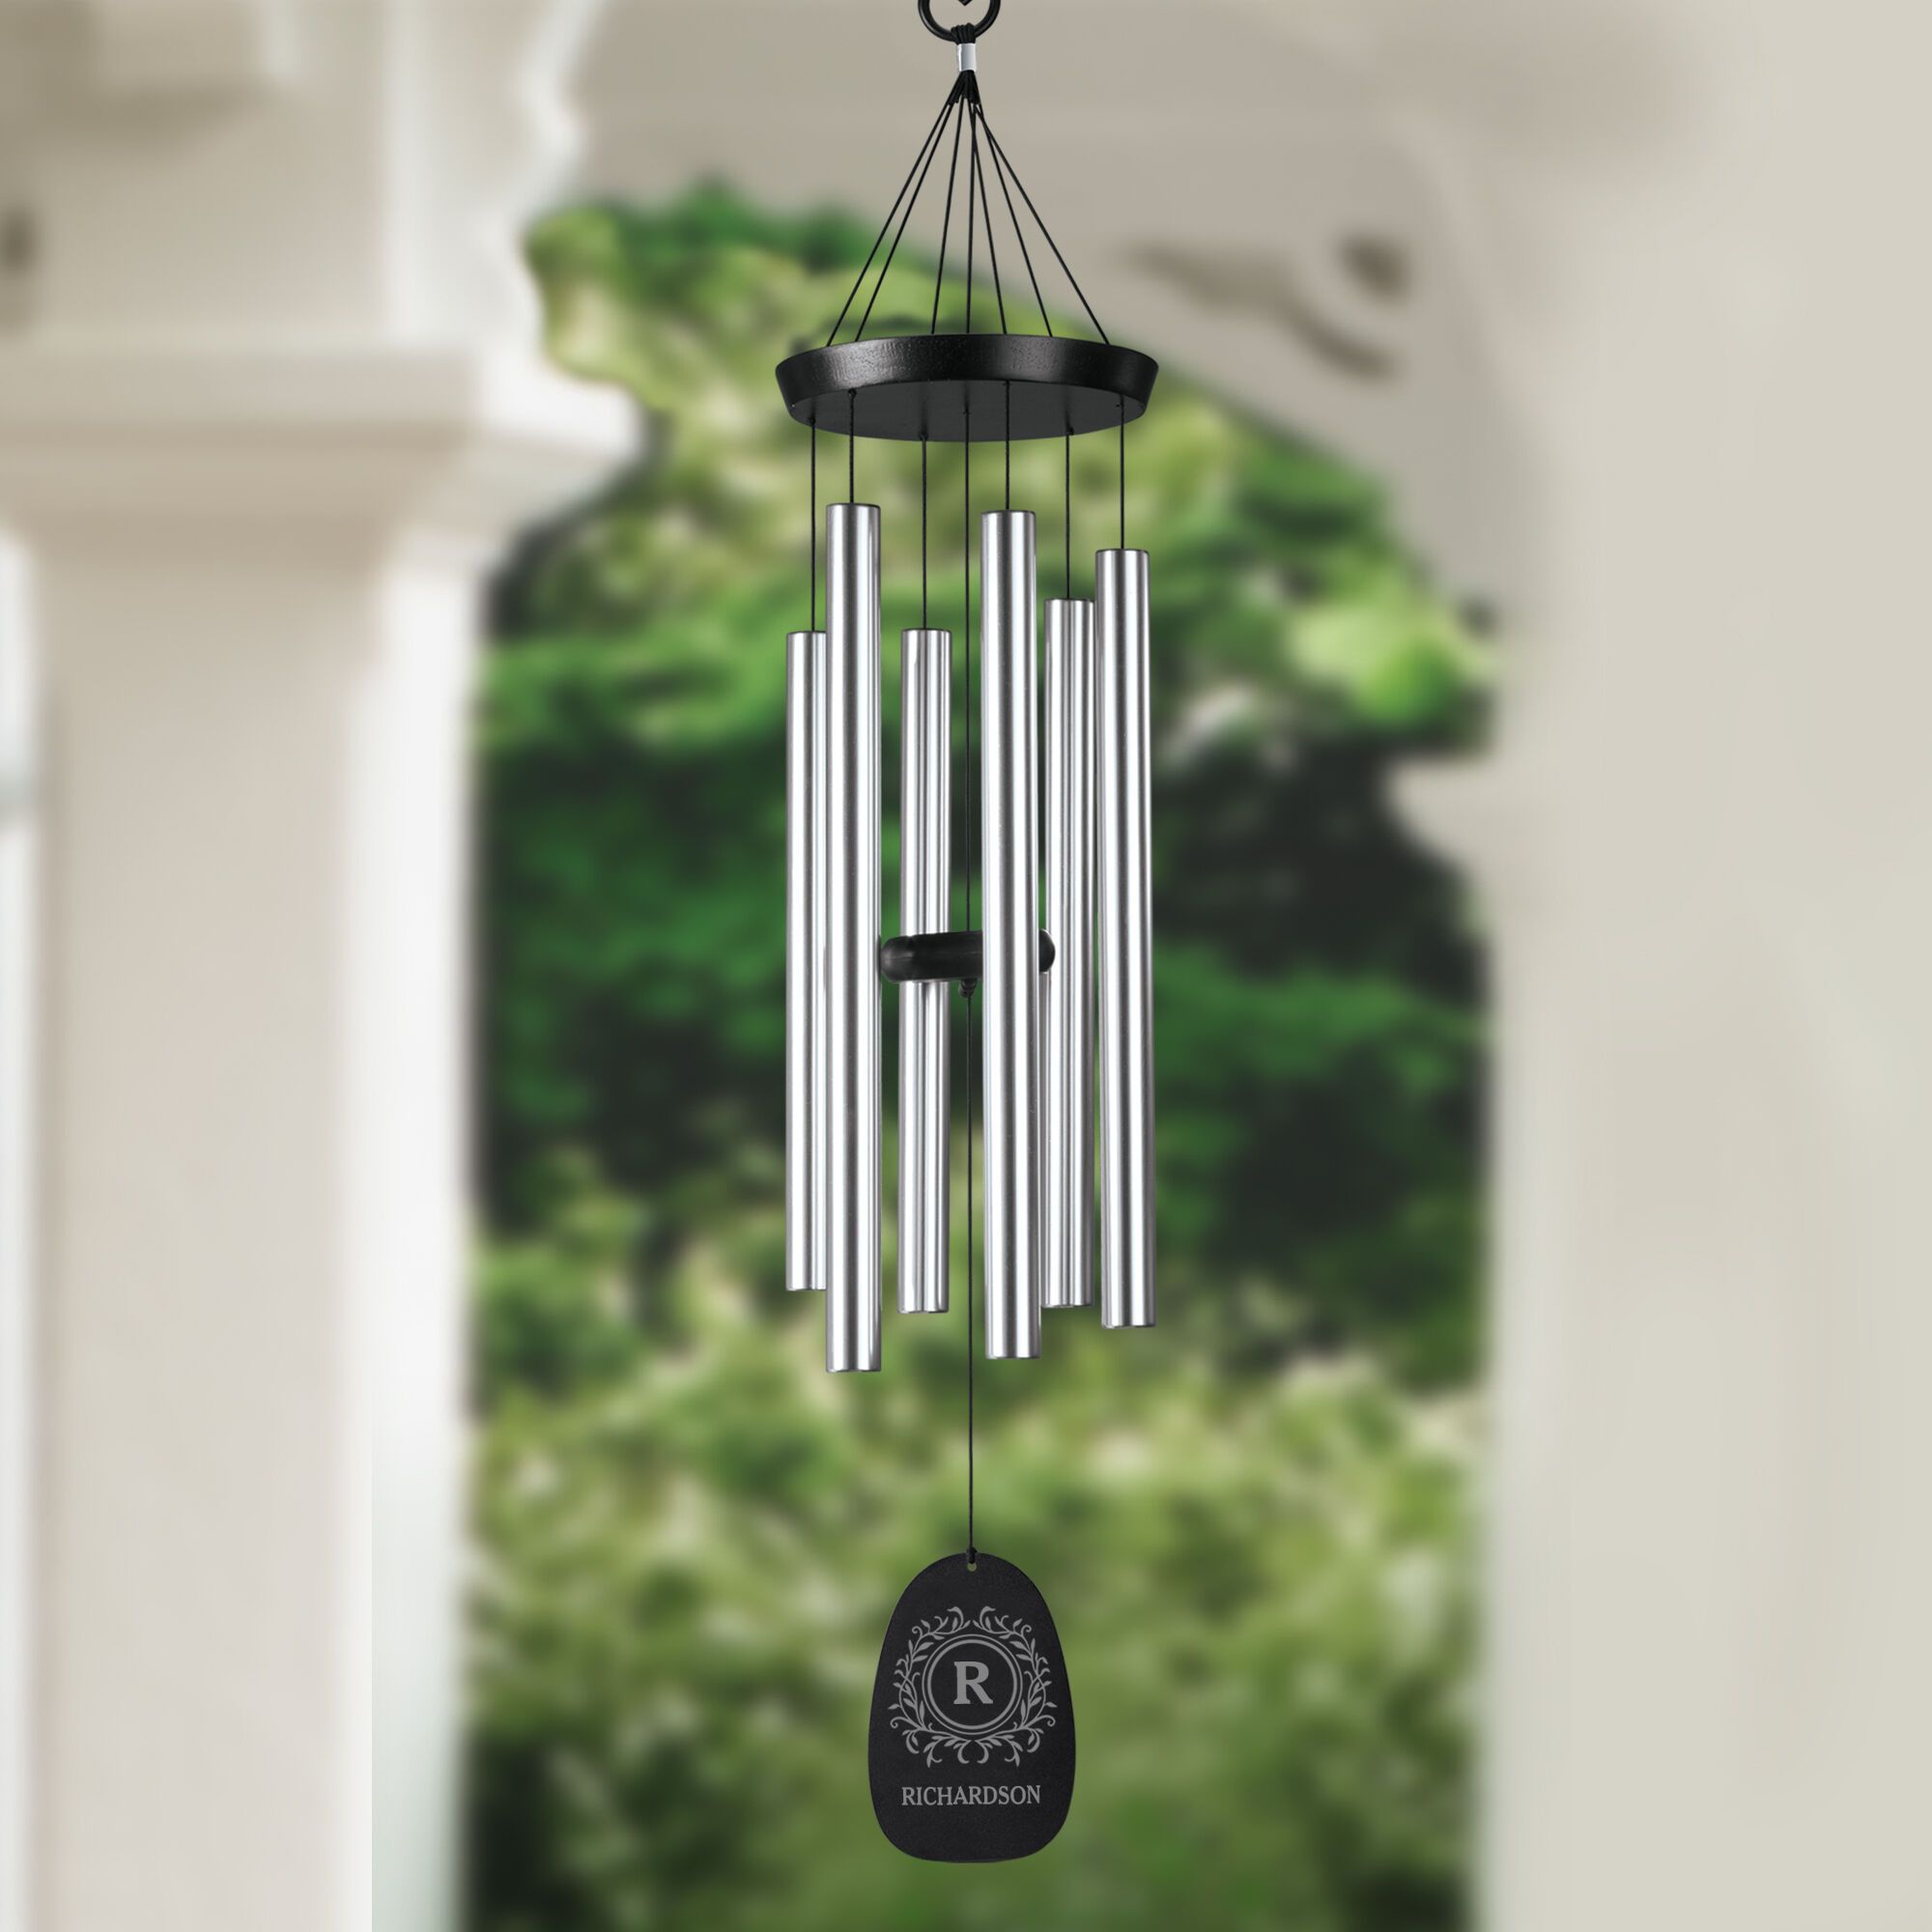 The Personalized Wind Chime 10245 0038 m room